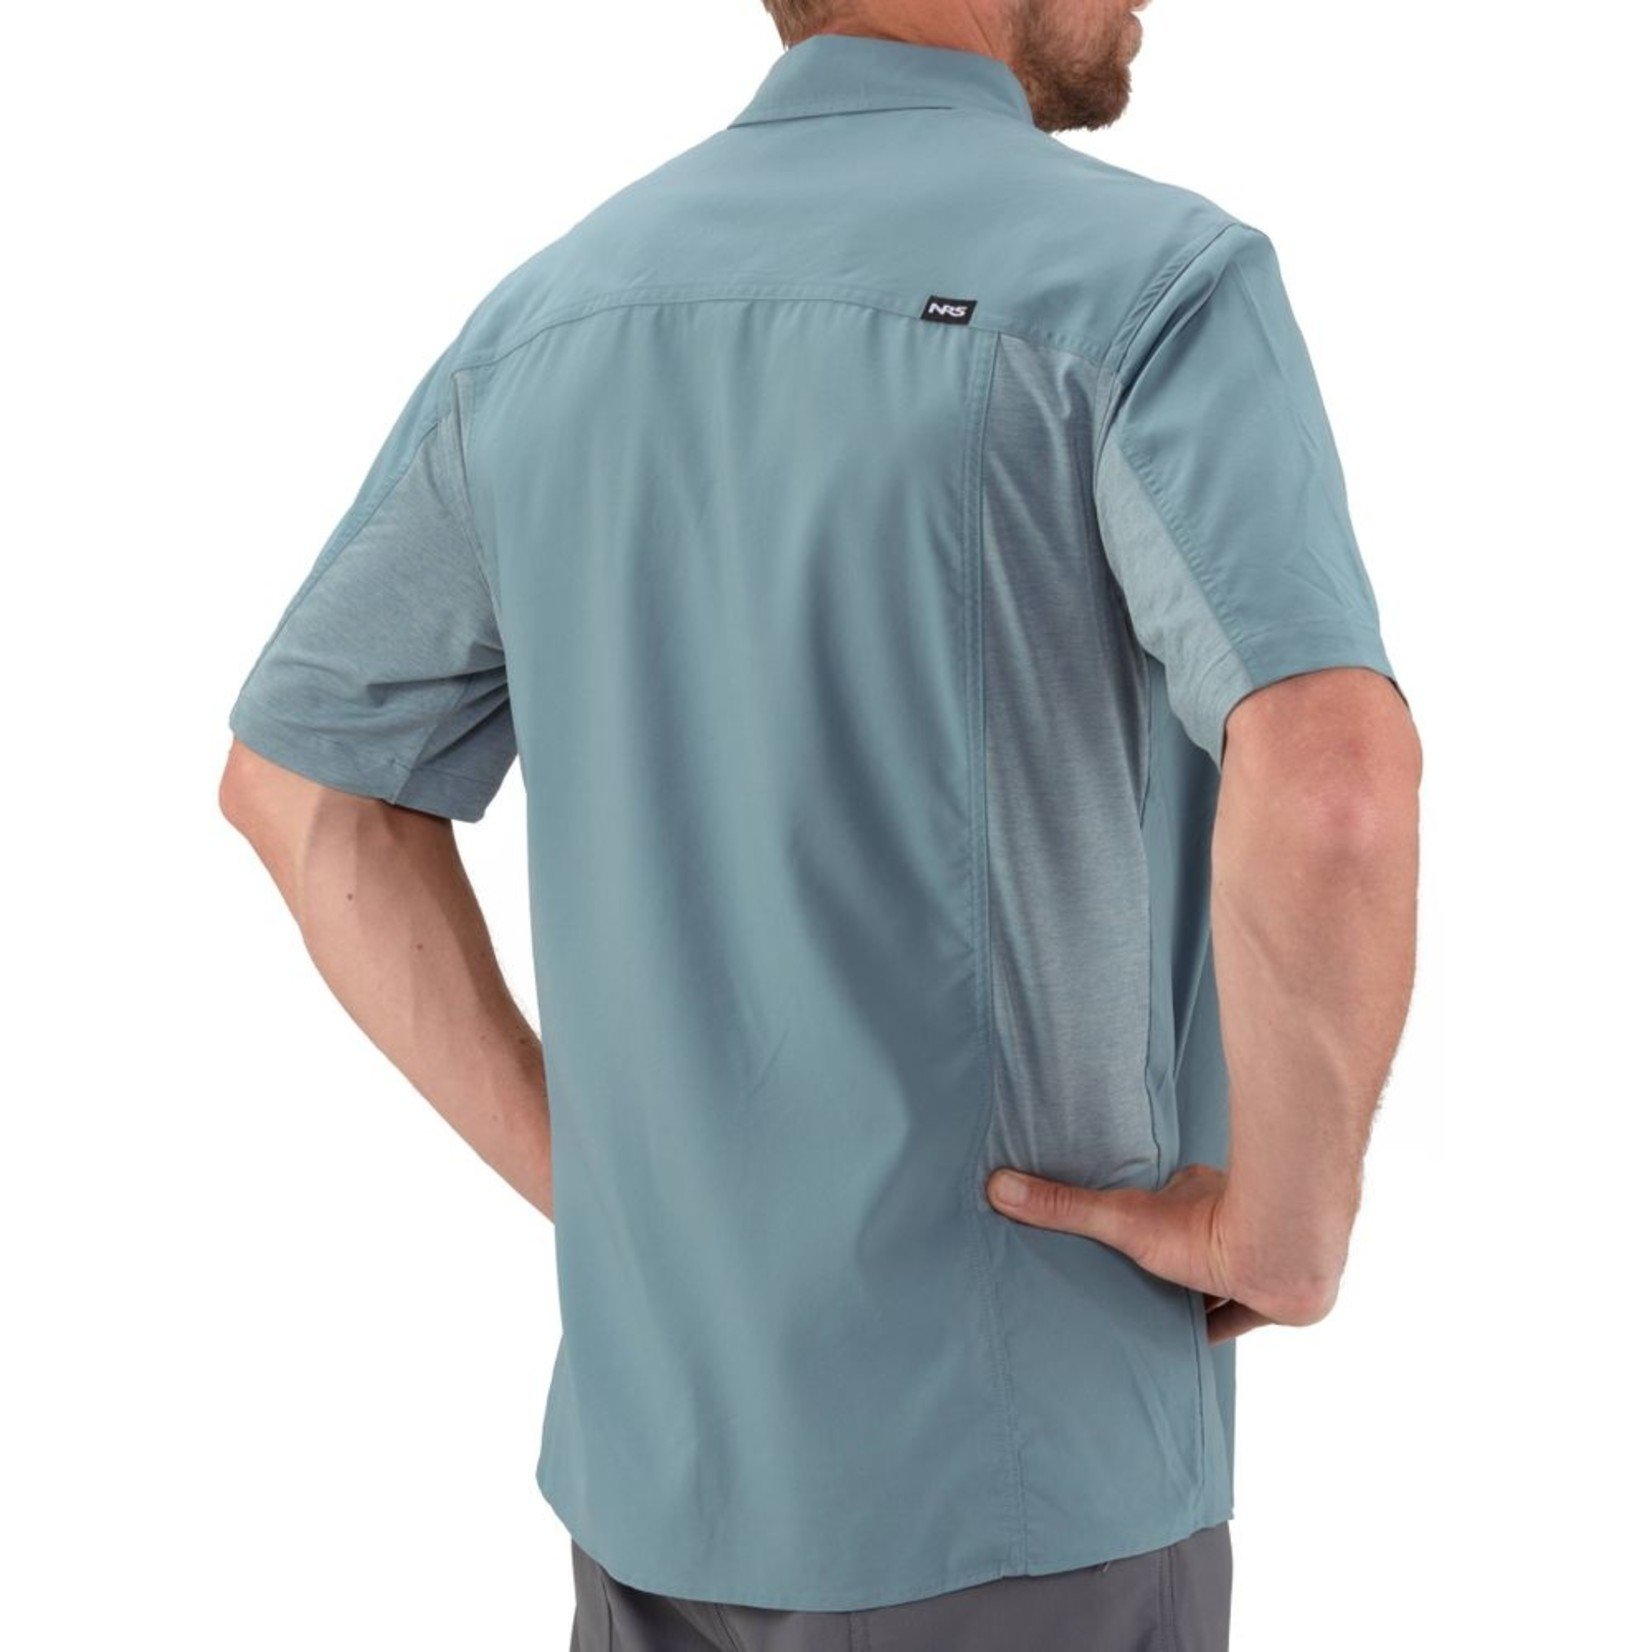 NRS NRS Men's Short-Sleeve Guide Shirt **Closeout**